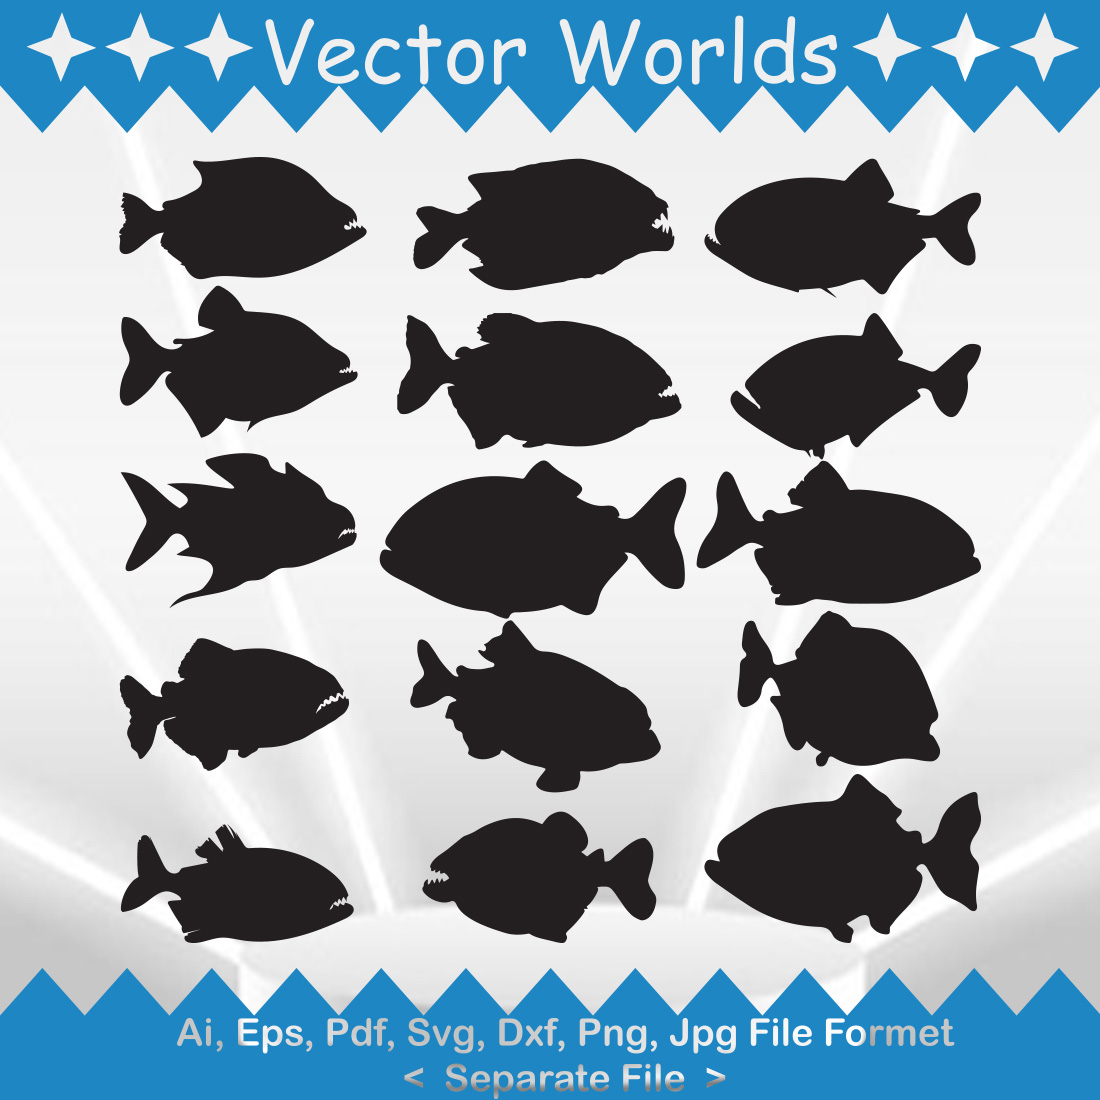 Group of fish silhouettes on a blue and white background.